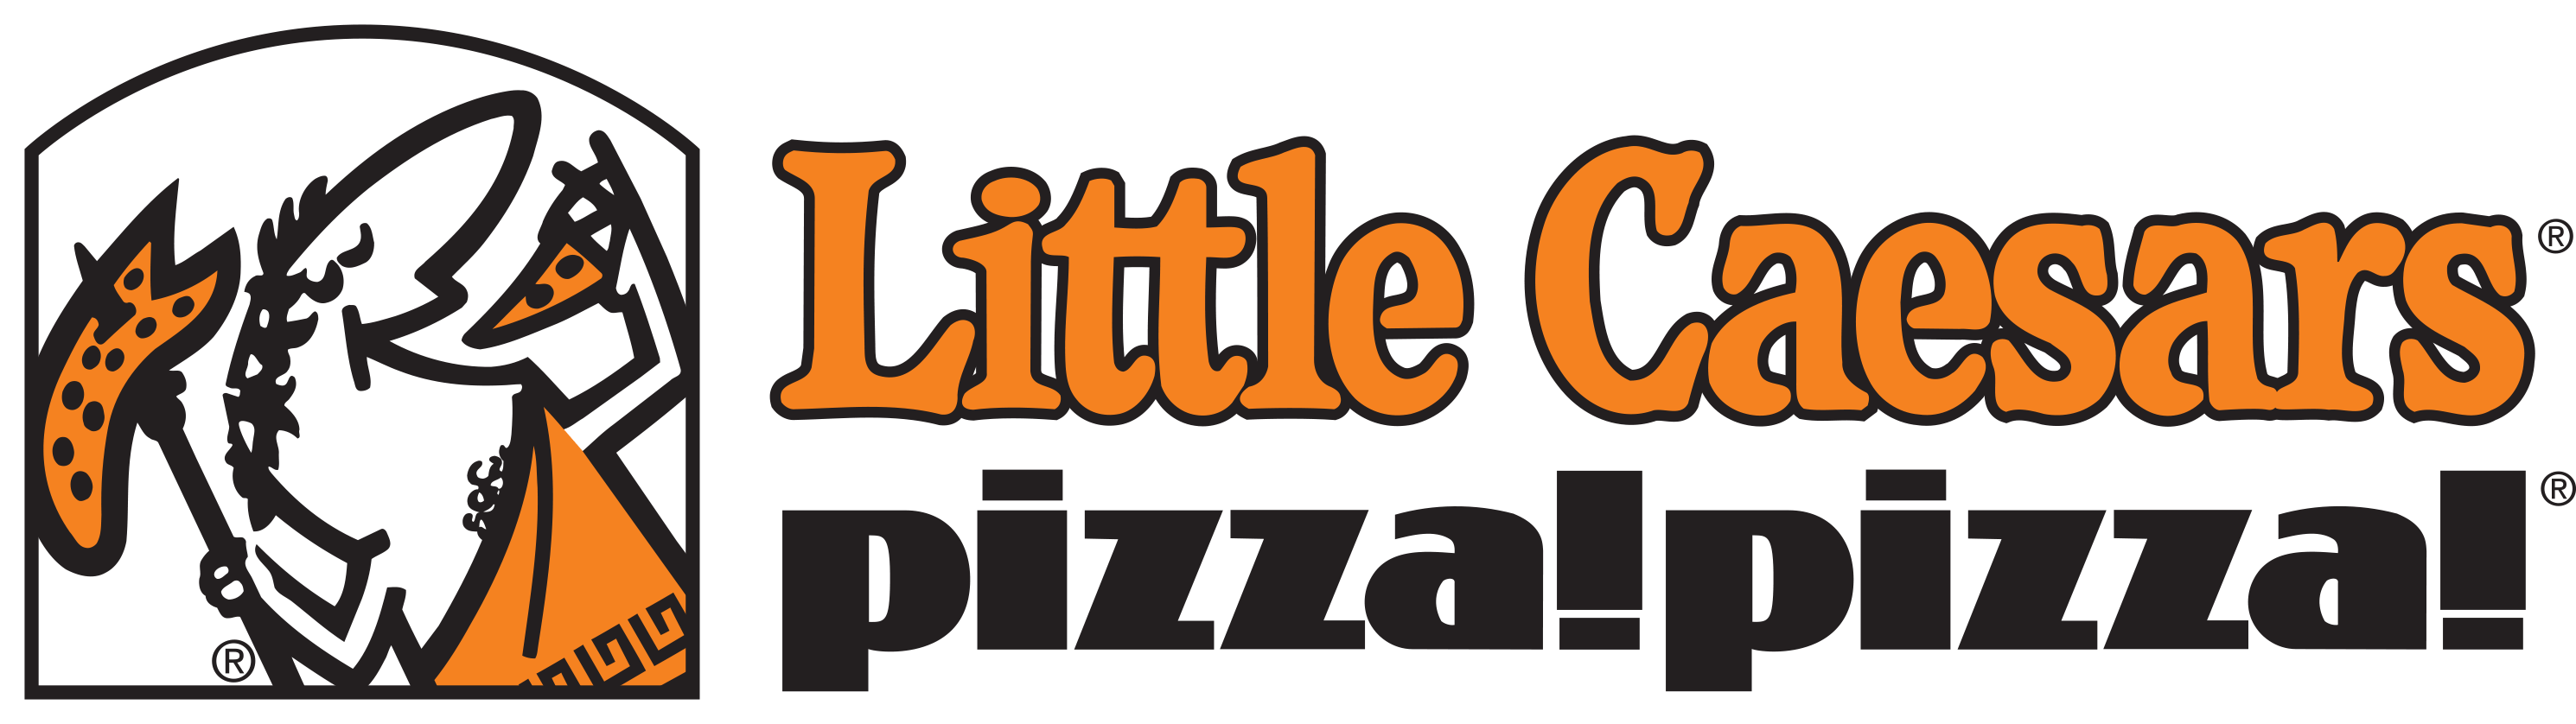 Lil Caeser Logo - 7 Lessons Radio Can Learn from Little Caesars Founder Mike Ilitch